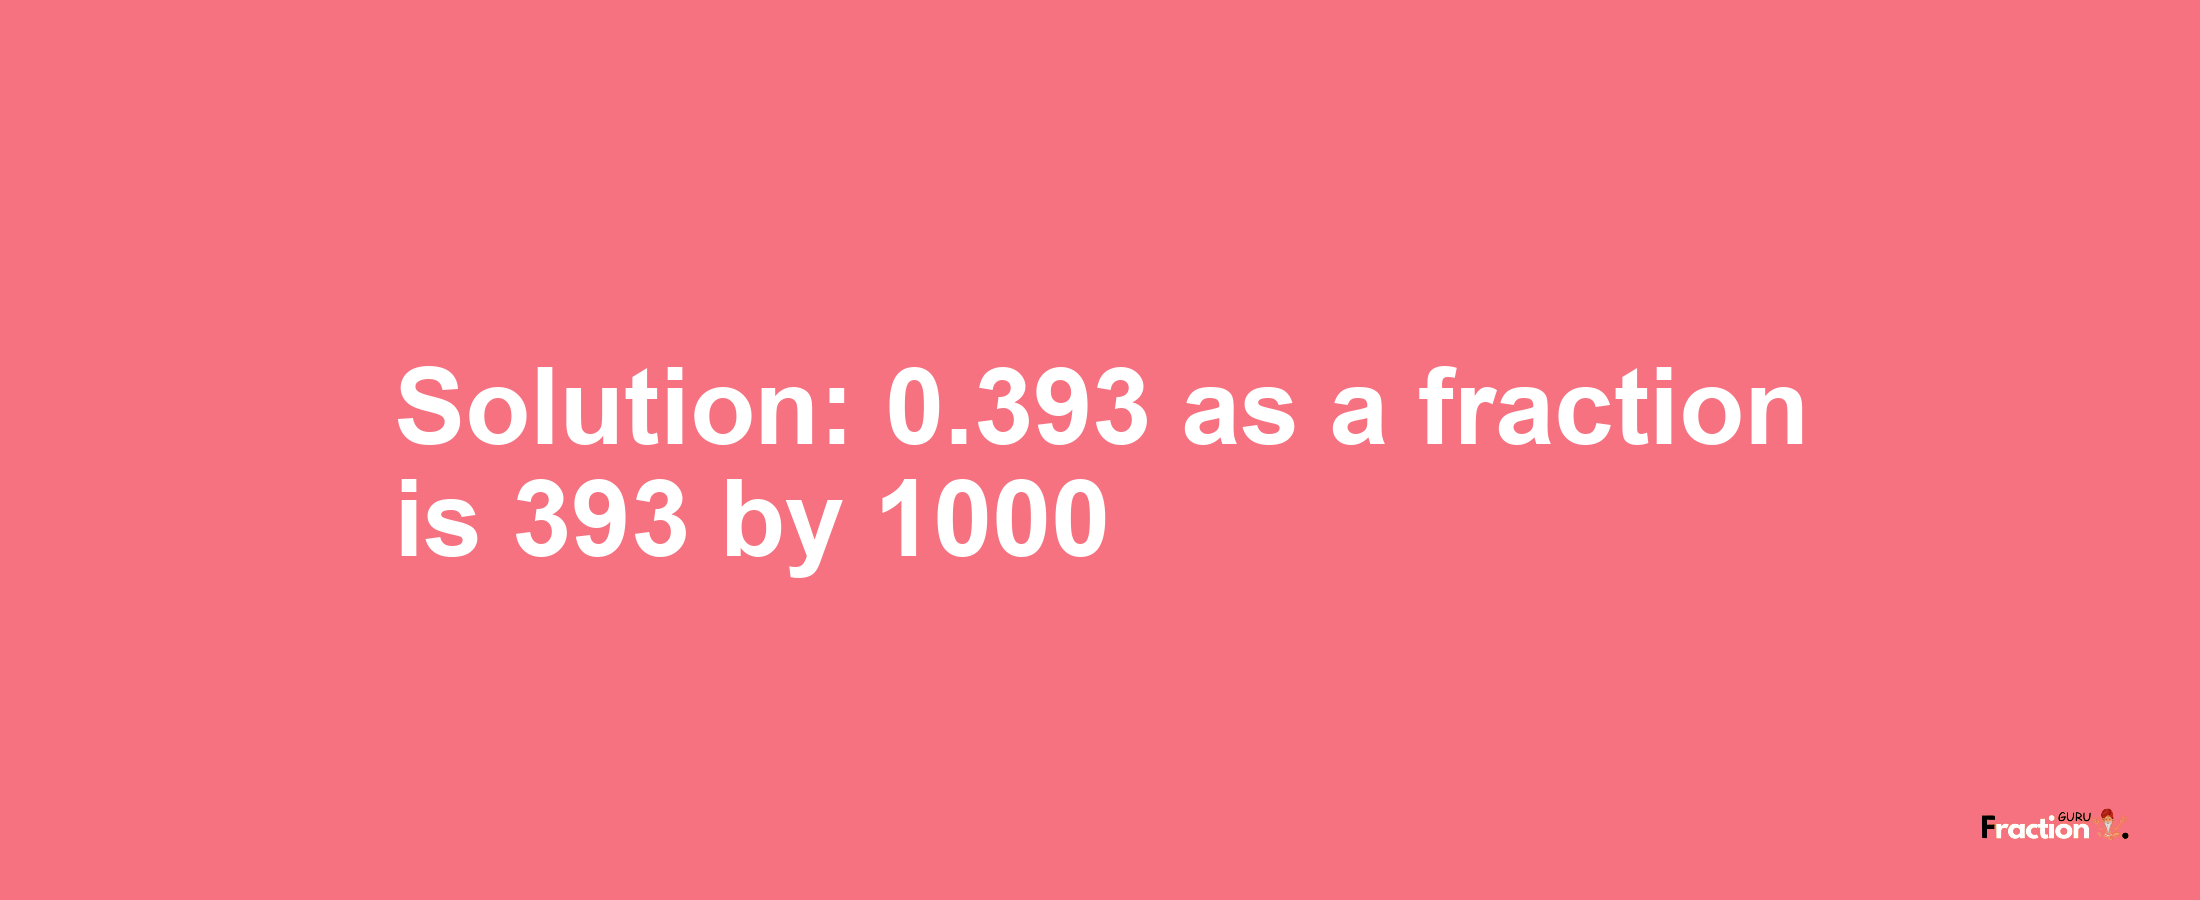 Solution:0.393 as a fraction is 393/1000